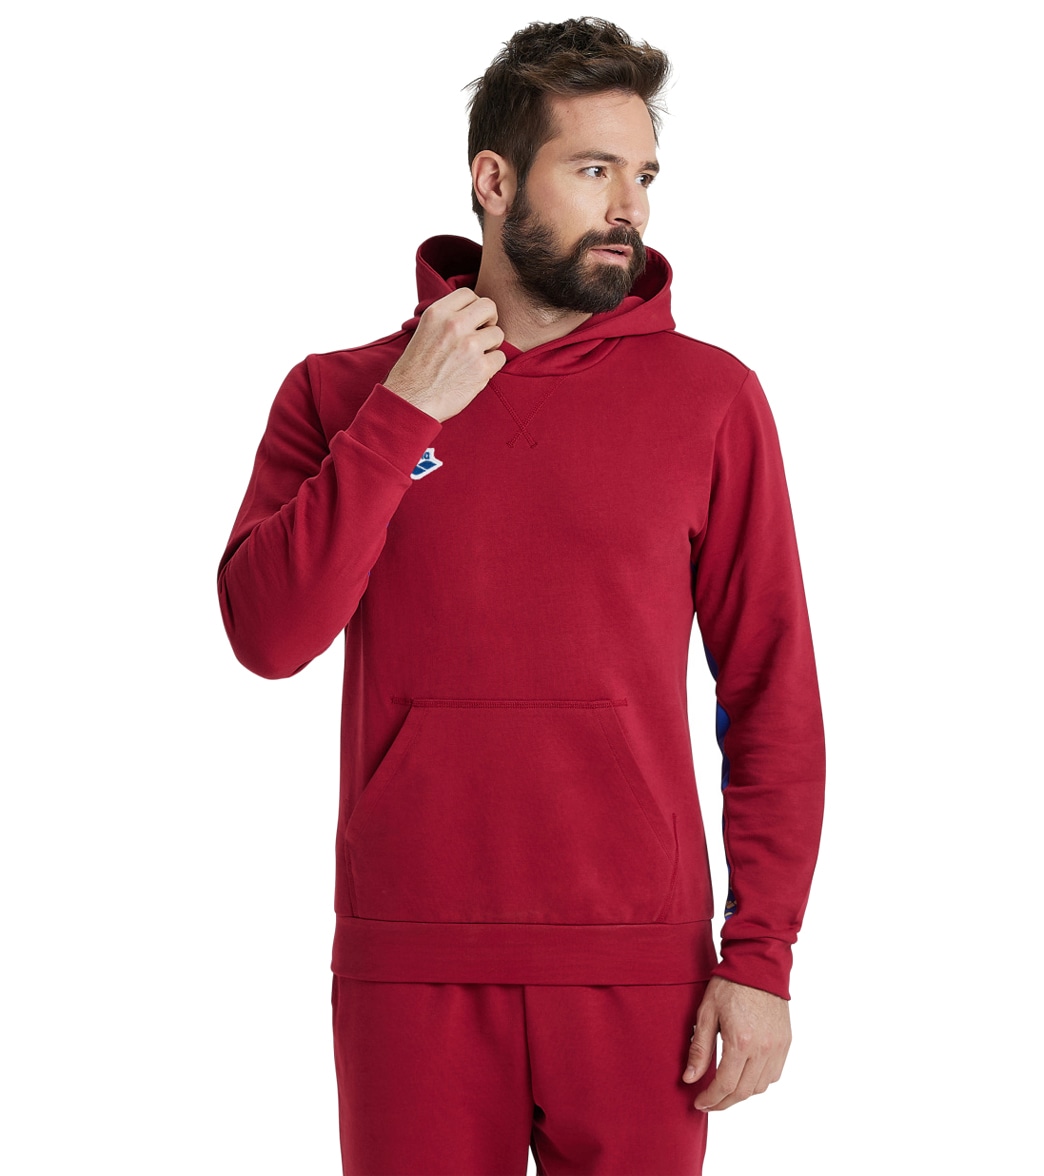 Arena Men's Icons Solid Pullover Hoodie - Burgundy/Neon Blue/Butter Large Cotton - Swimoutlet.com